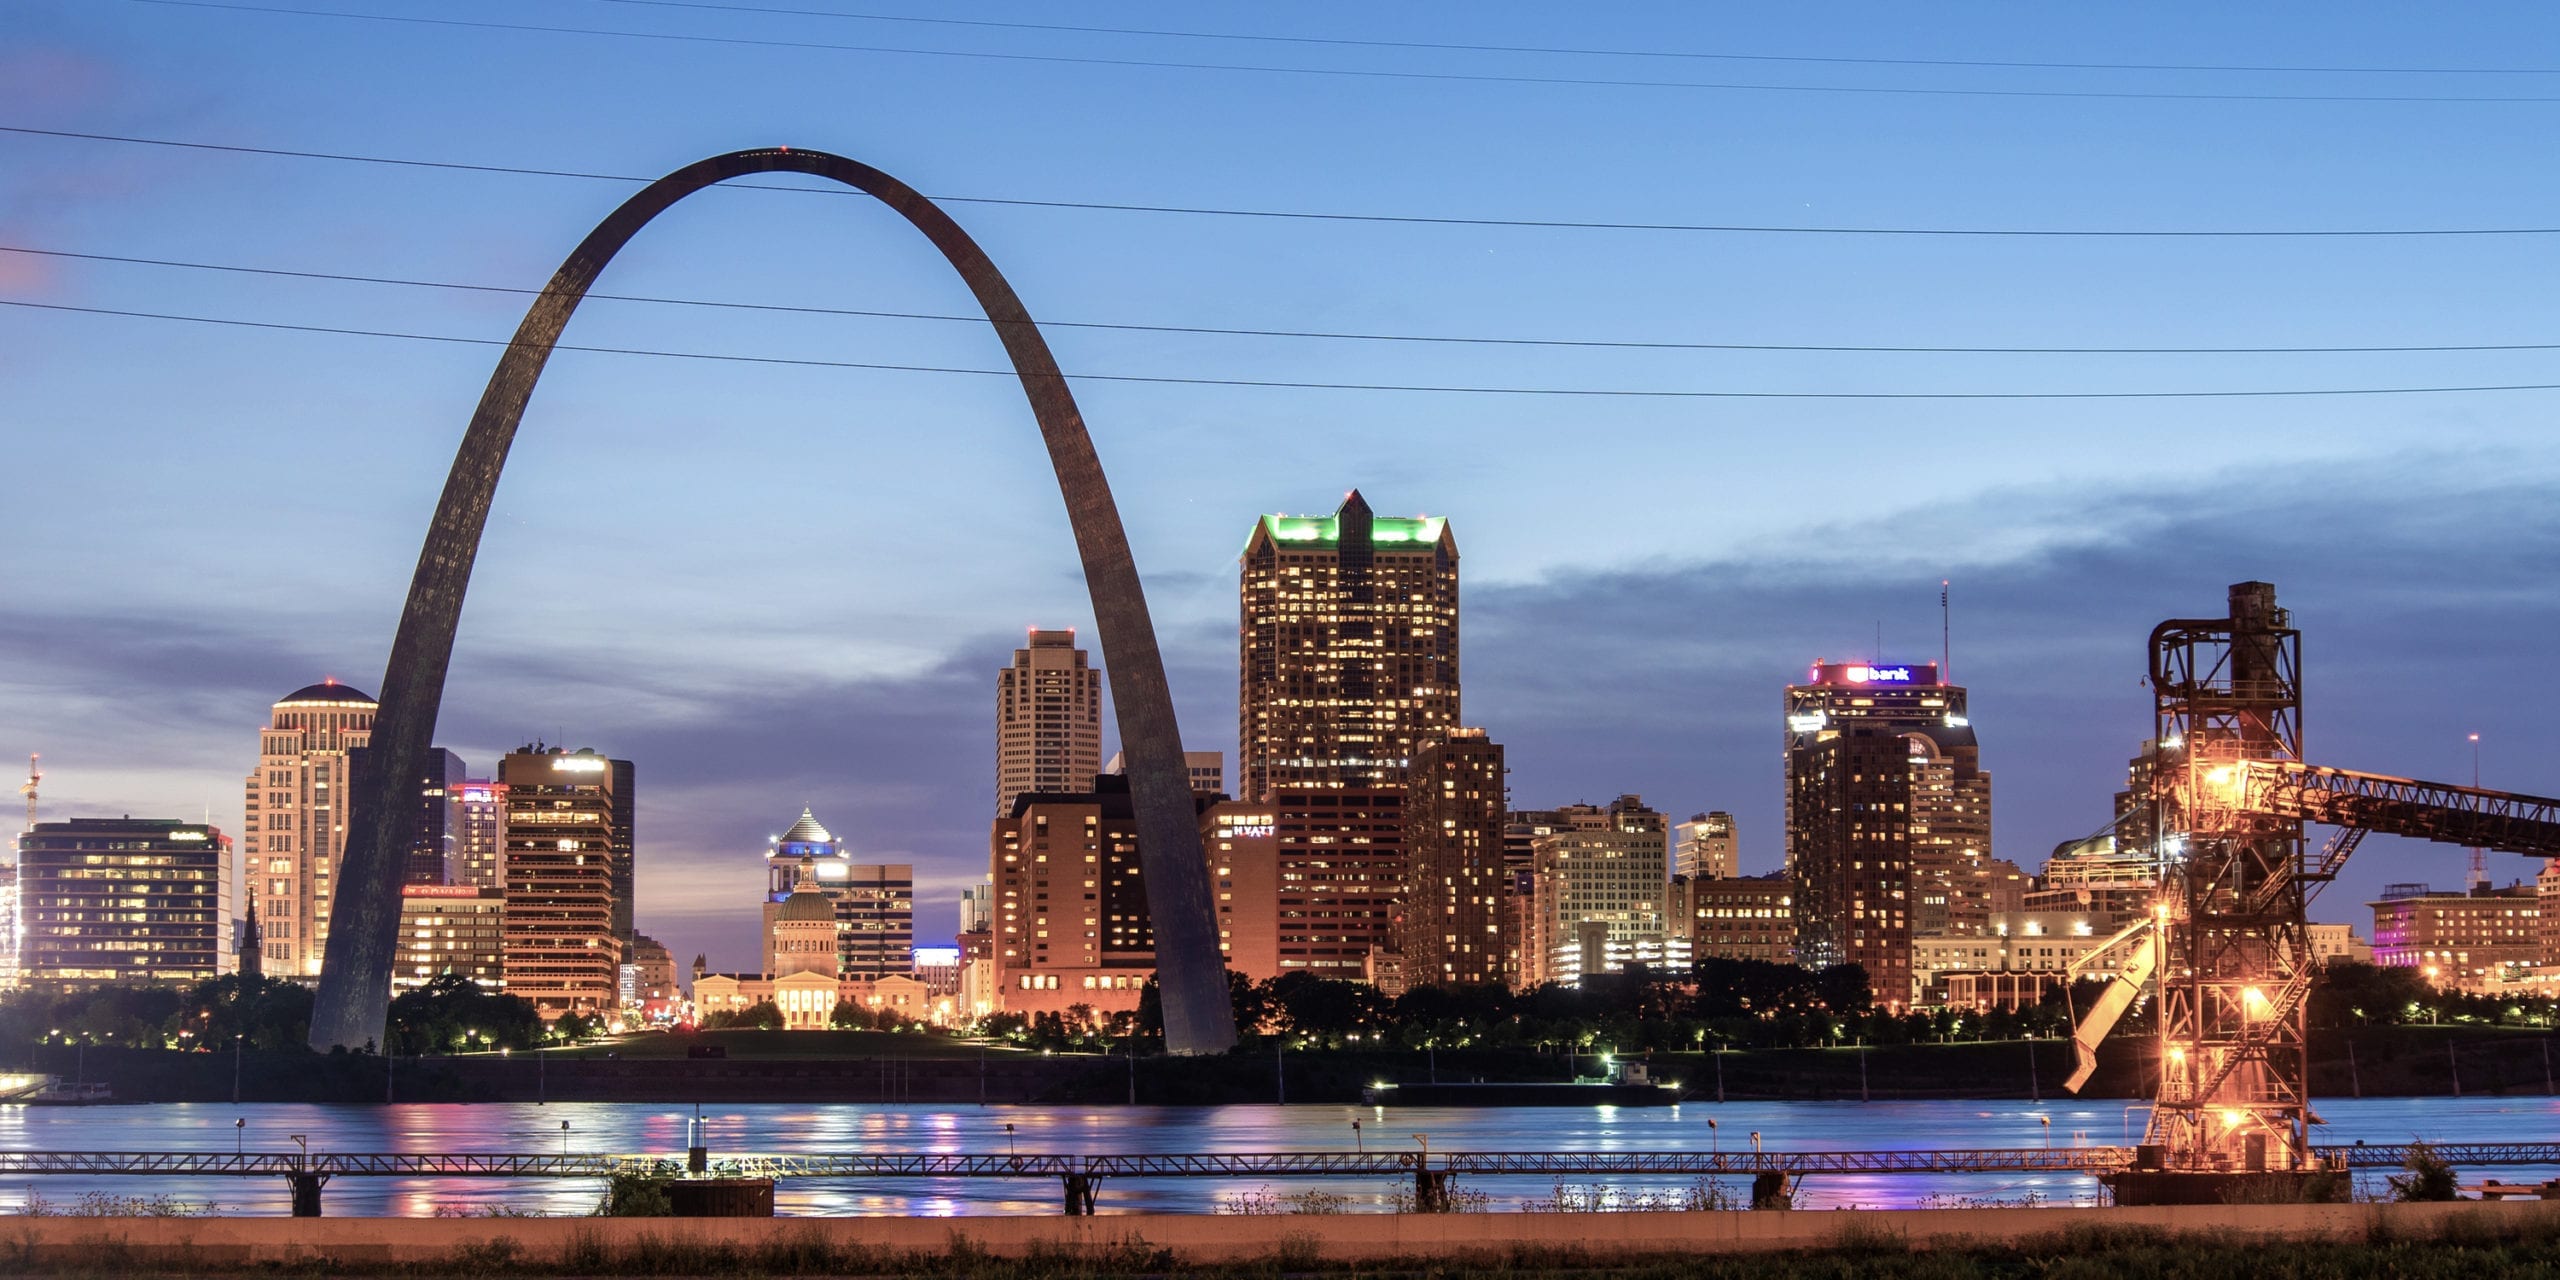 St. Louis riverfront and skyline. Photo by Flickr user Jim Bauer.